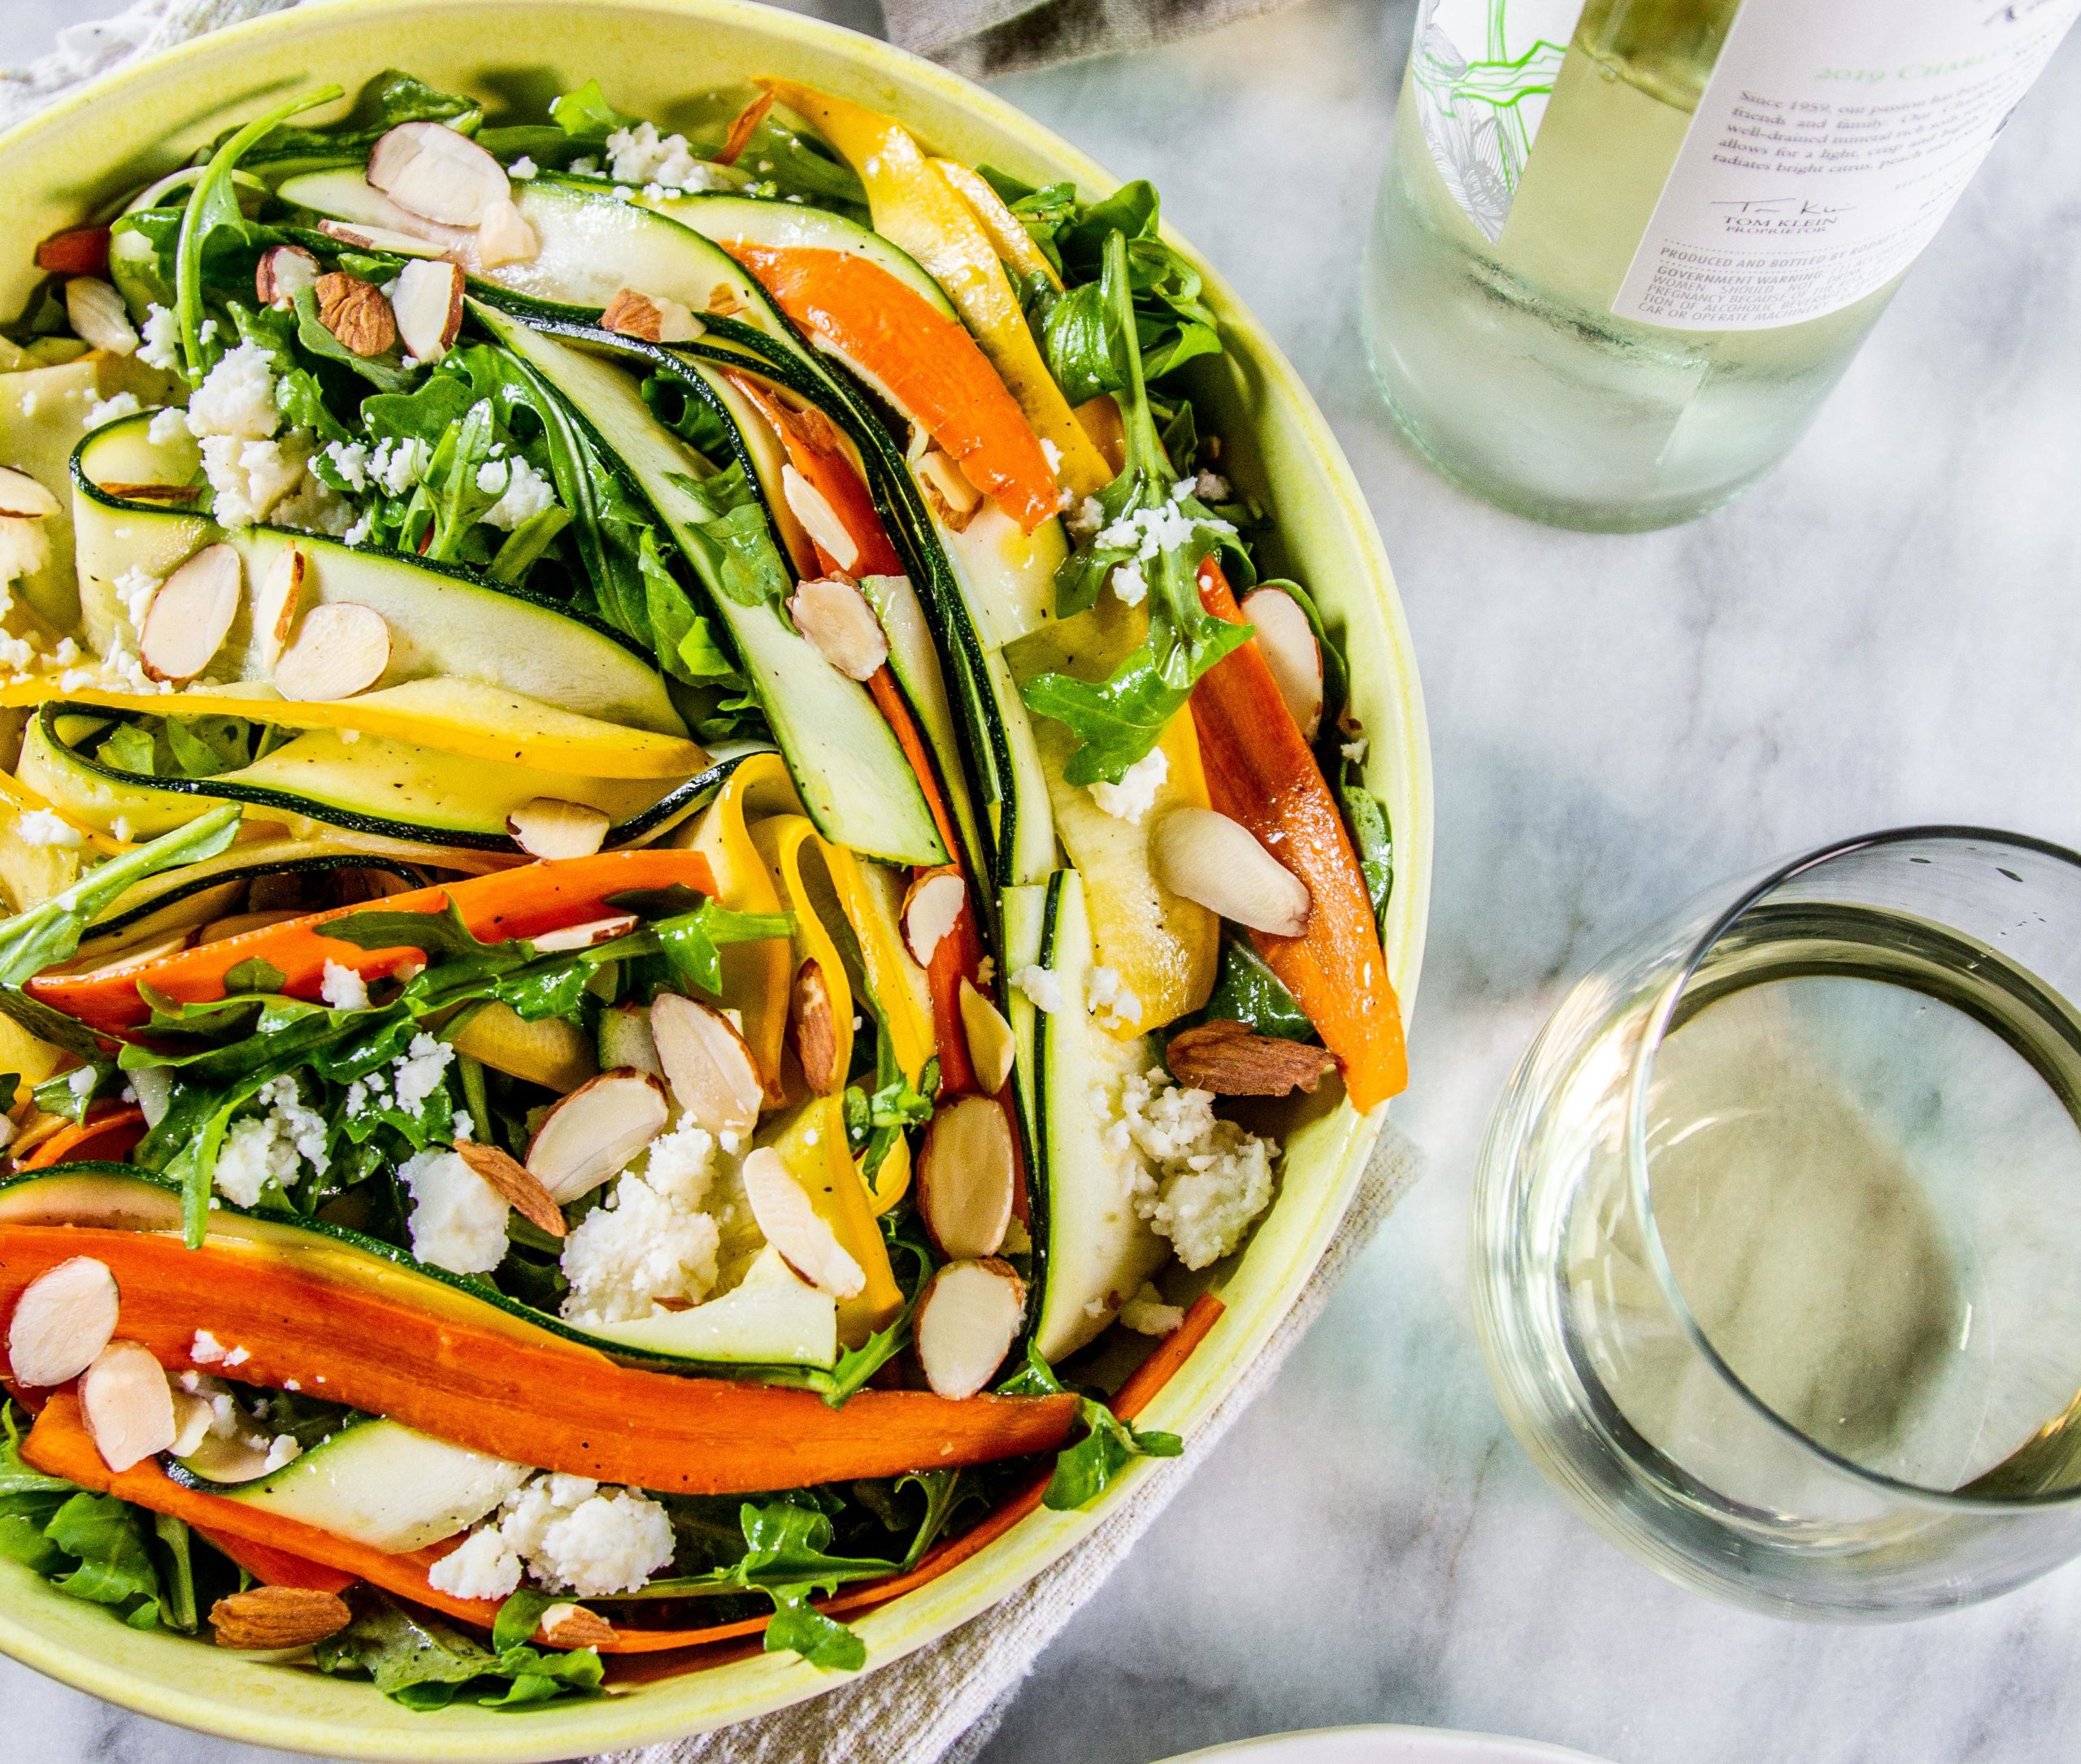 Arugula Salad with Zucchini, Carrots and Toasted Almonds